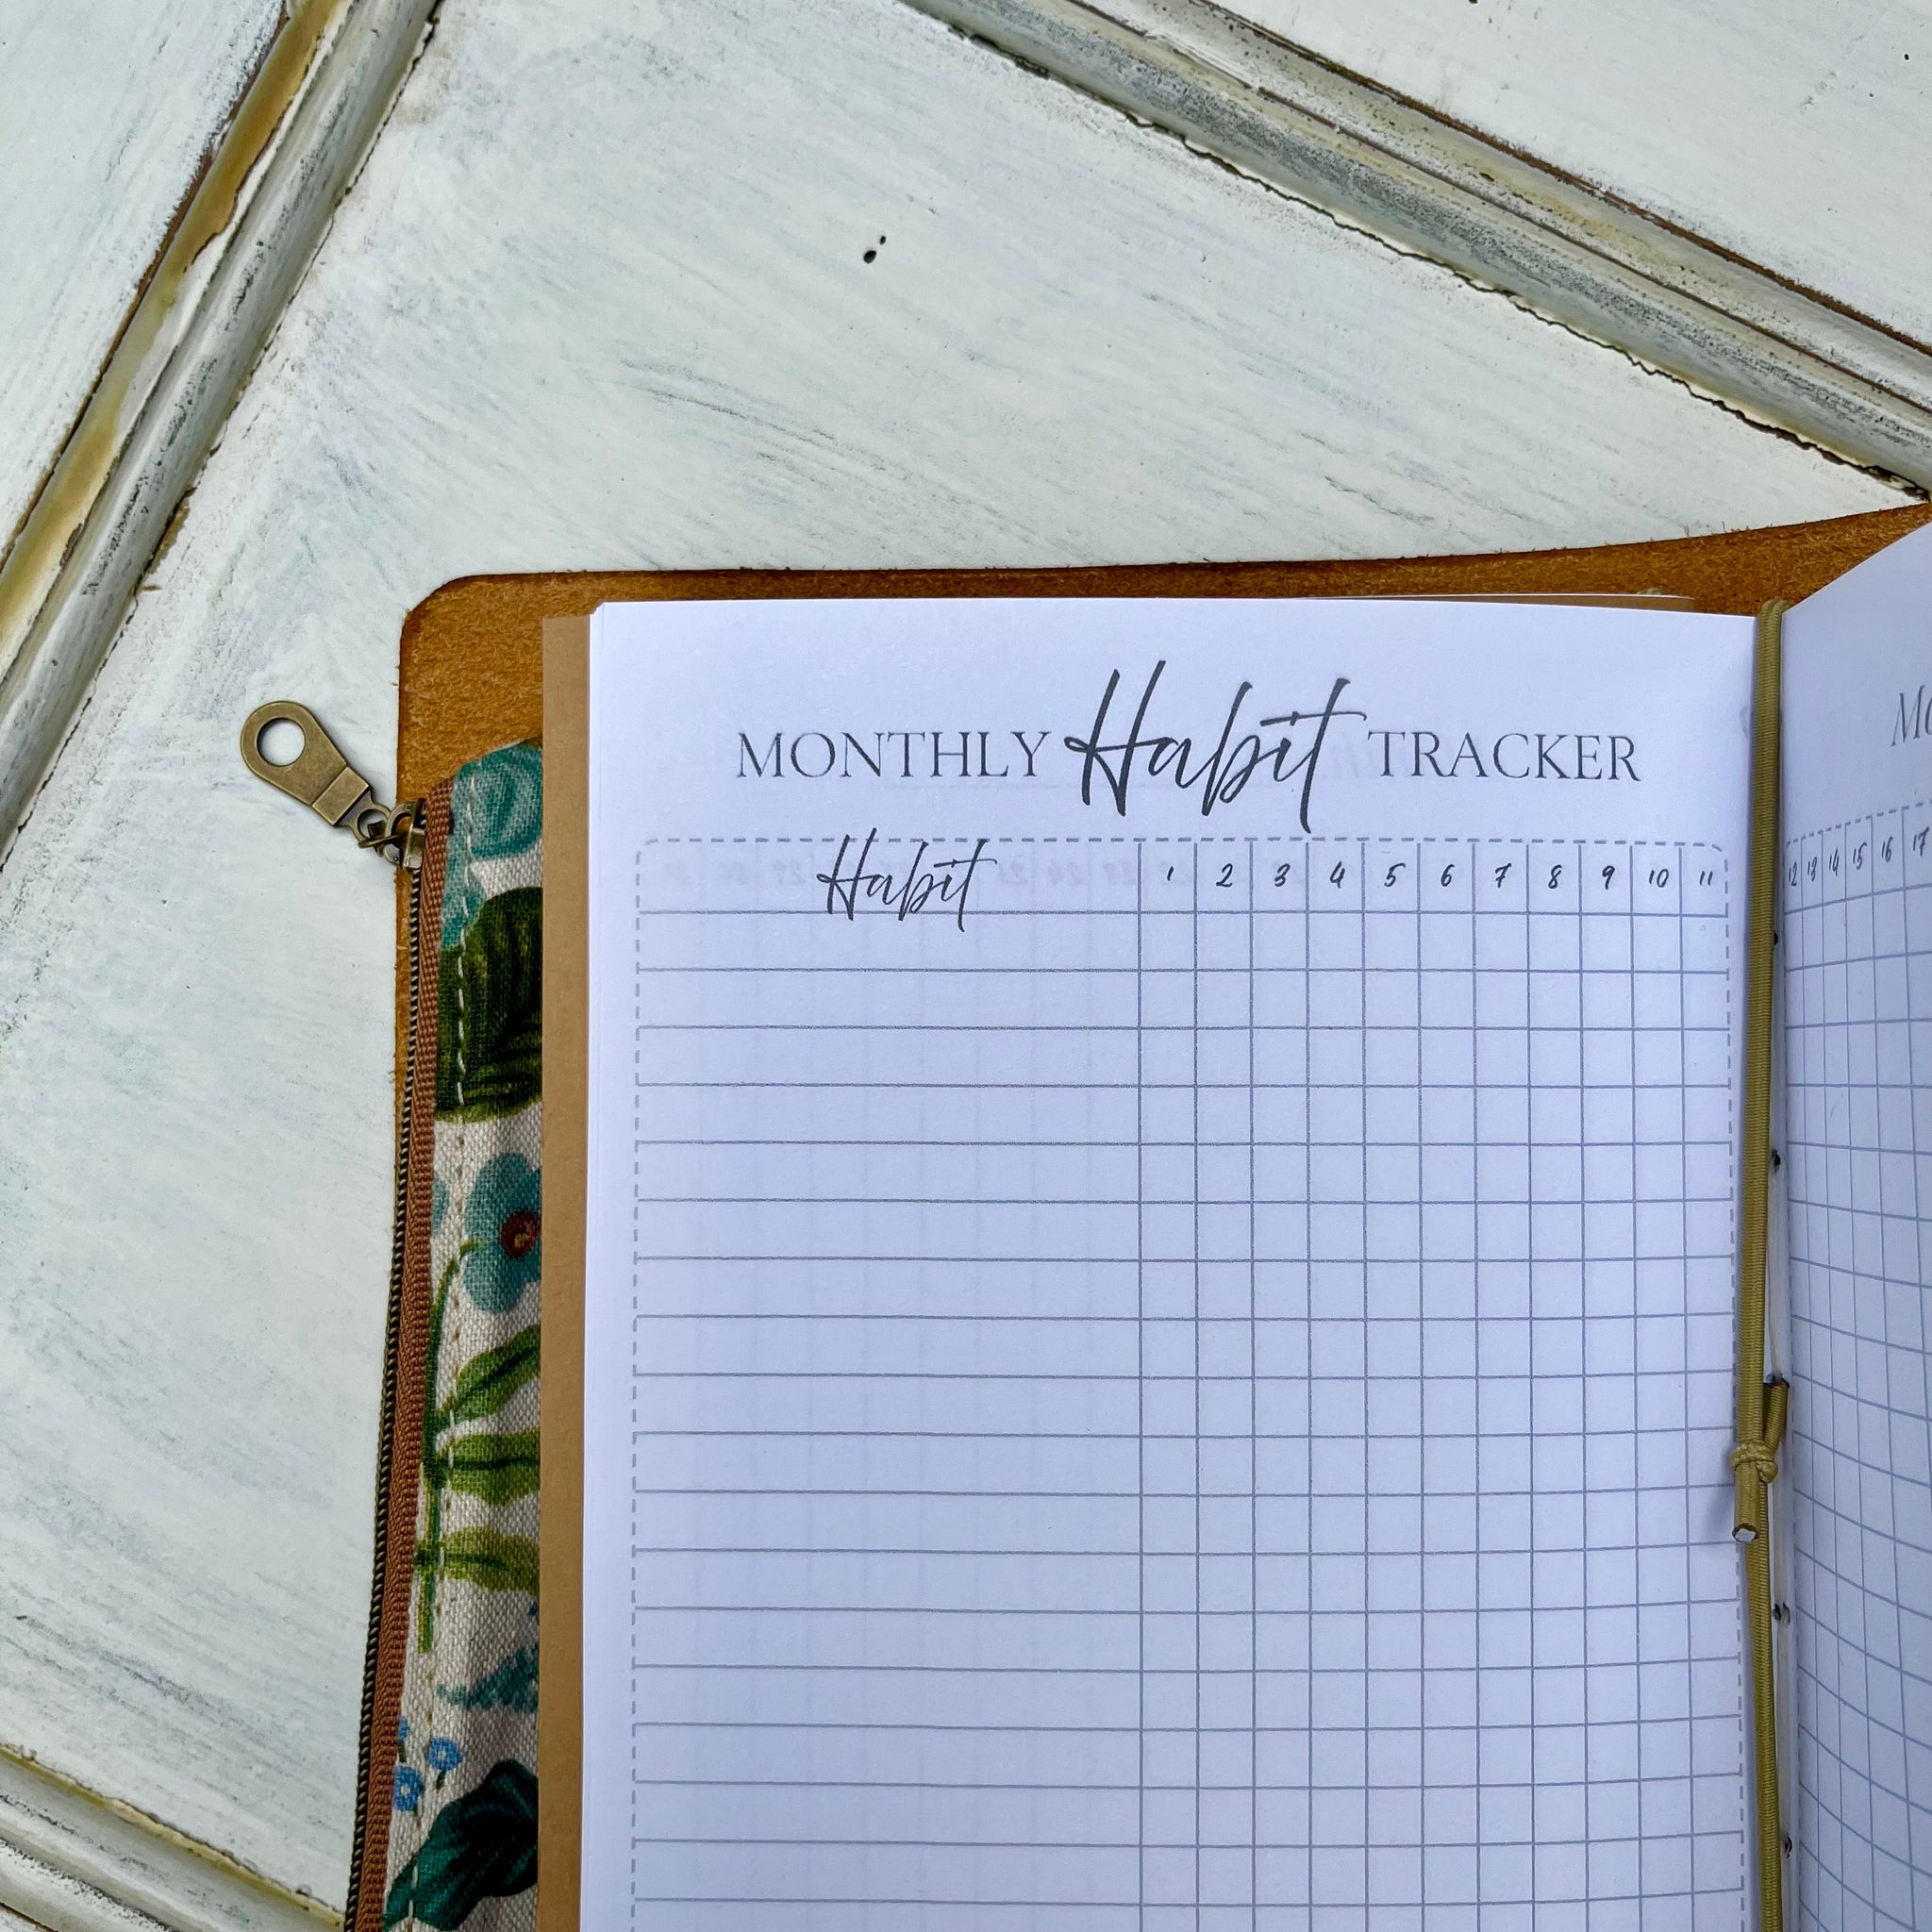 How to Set Up a Habit Tracking Journal